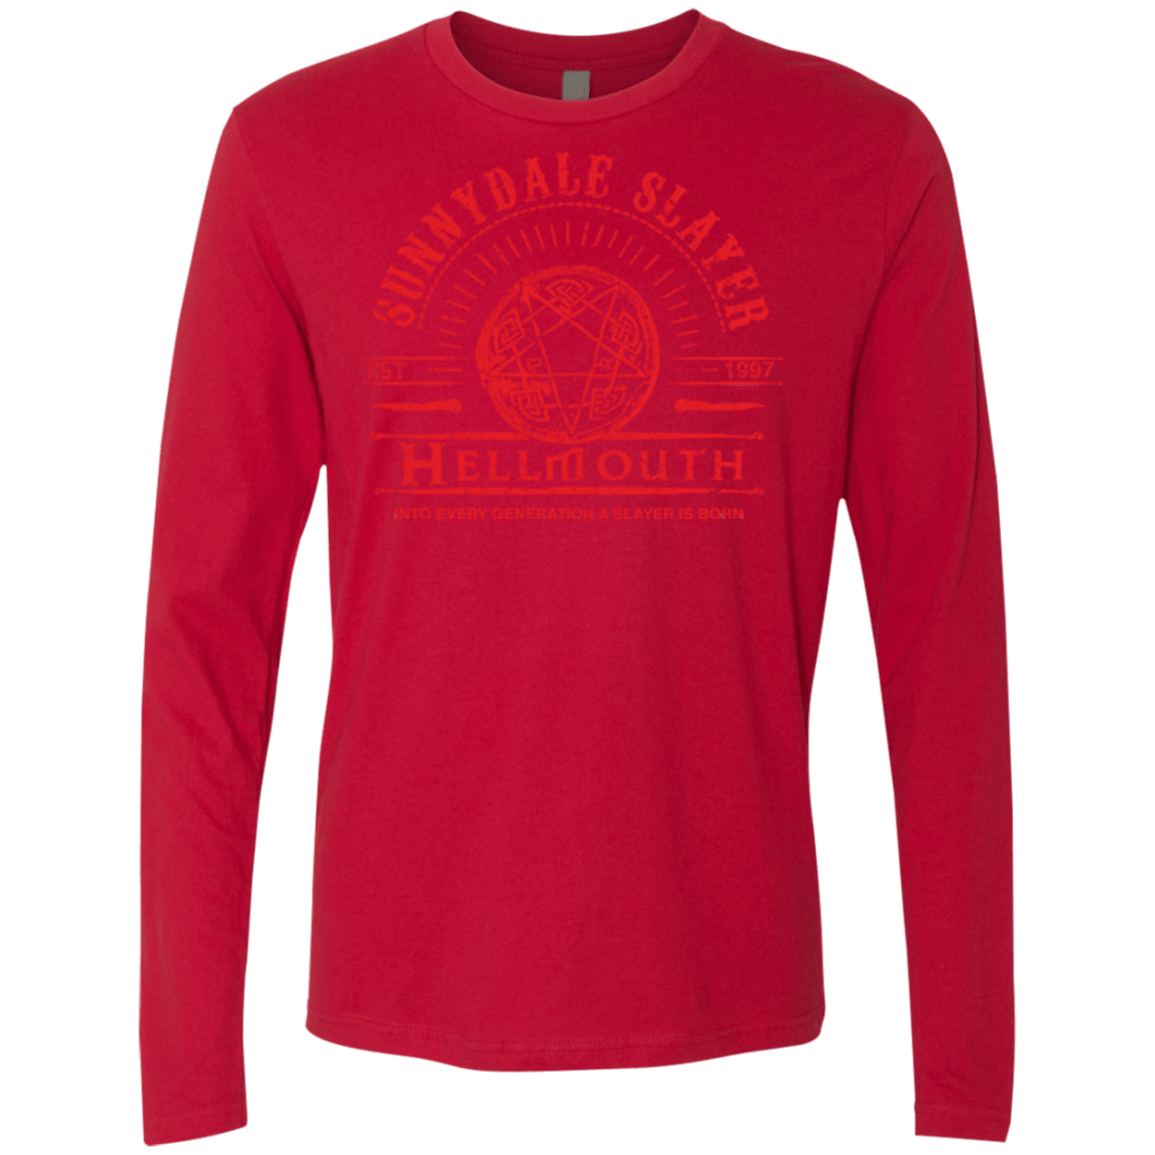 T-Shirts Red / Small Hellmouth Men's Premium Long Sleeve